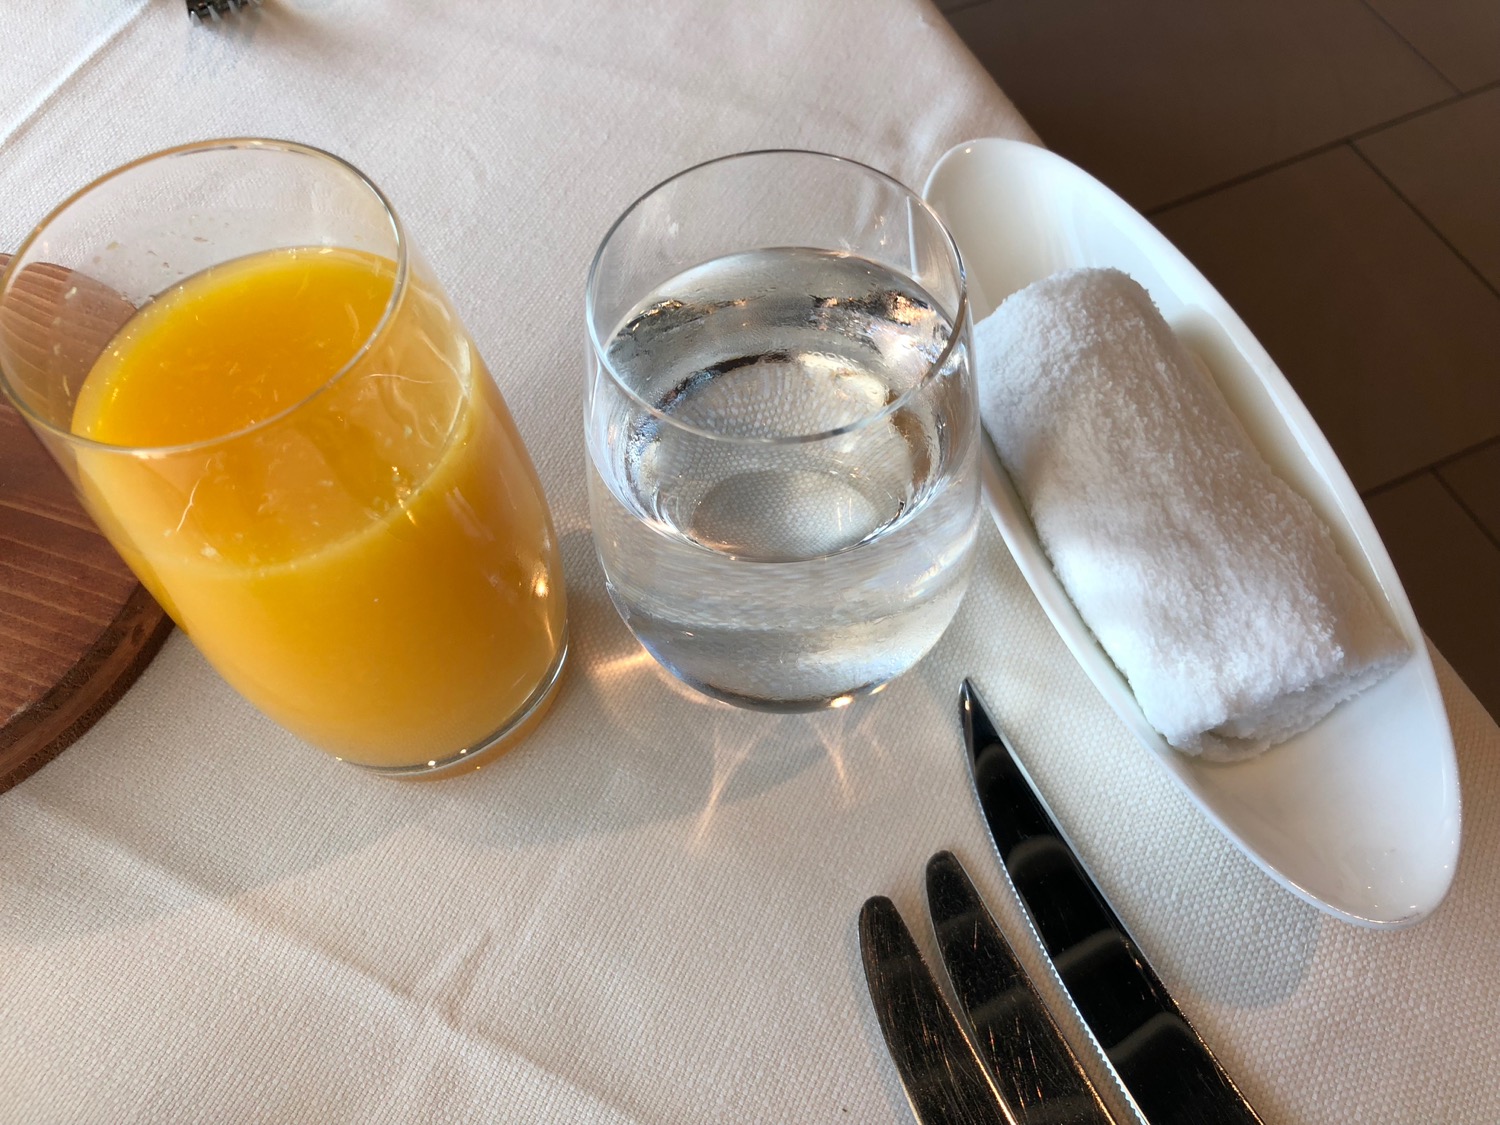 a plate of water and a glass of orange juice on a table